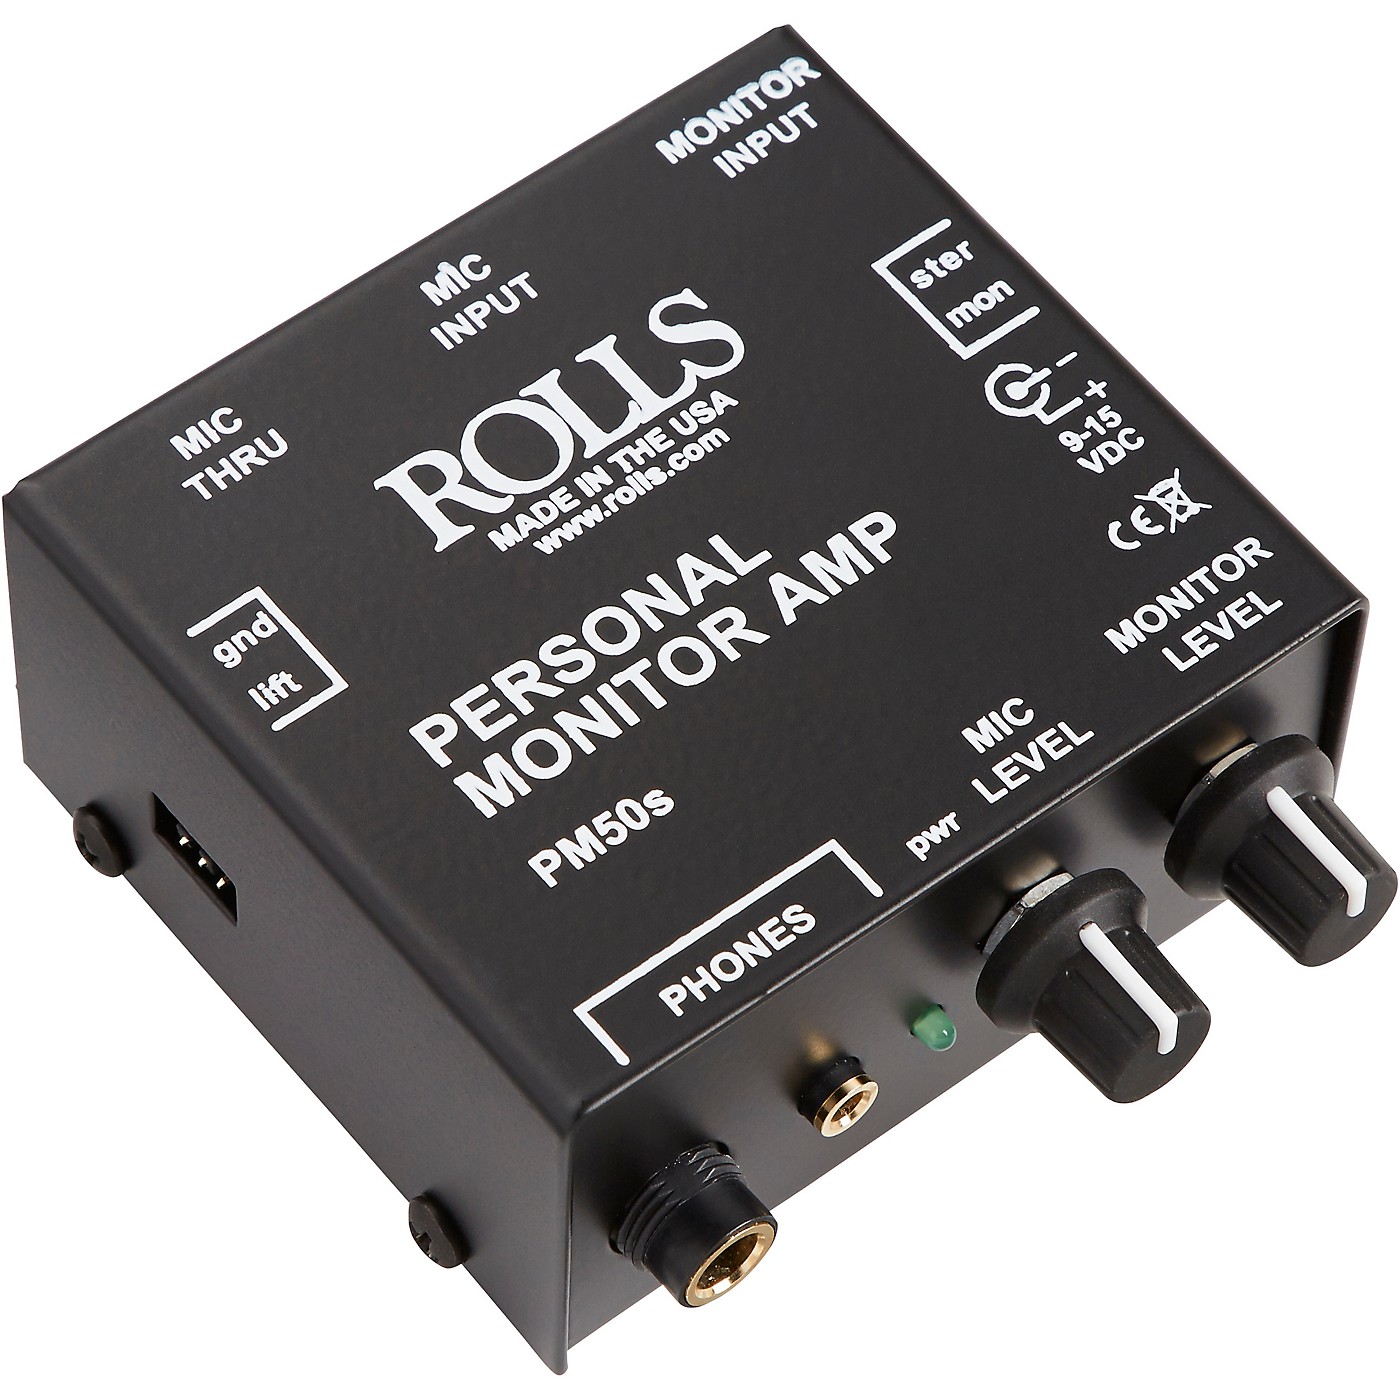 Rolls PM50S Personal Monitor Amp thumbnail